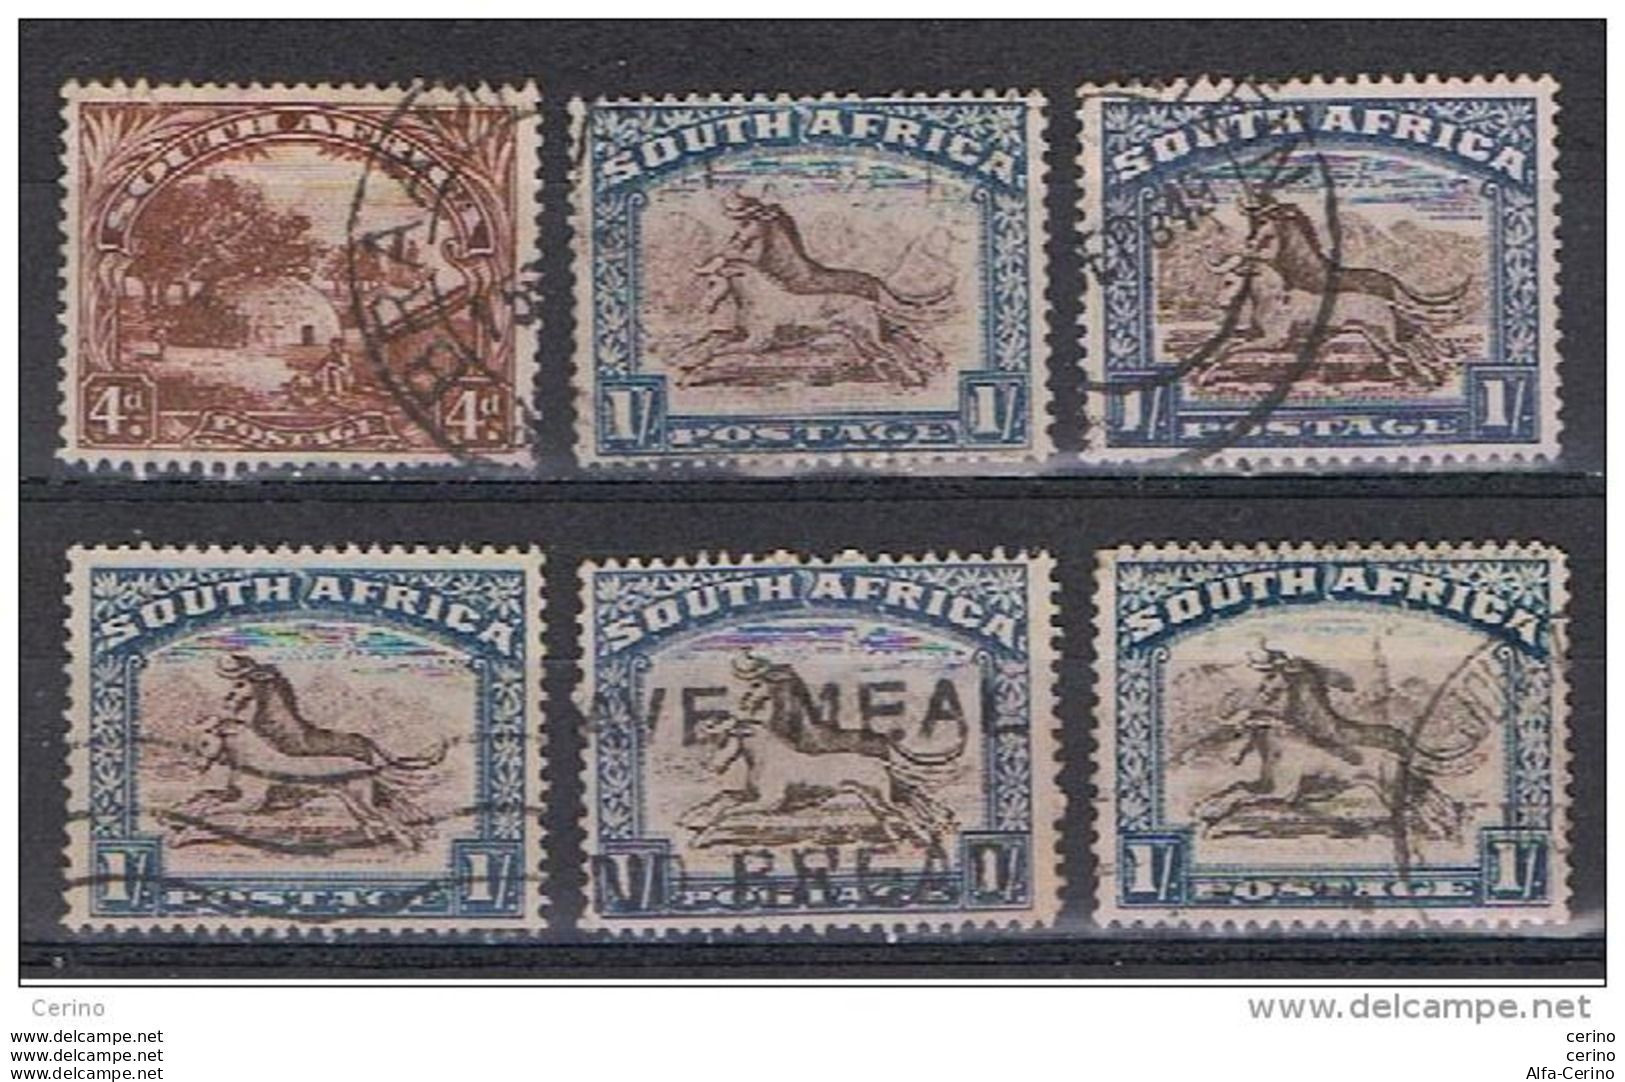 SOUTH   AFRICA:  1927/28  ORDINARY  SERIES  -  LOT  6  USED  STAMPS  -  YV/TELL. 26 + 27x5 - Used Stamps